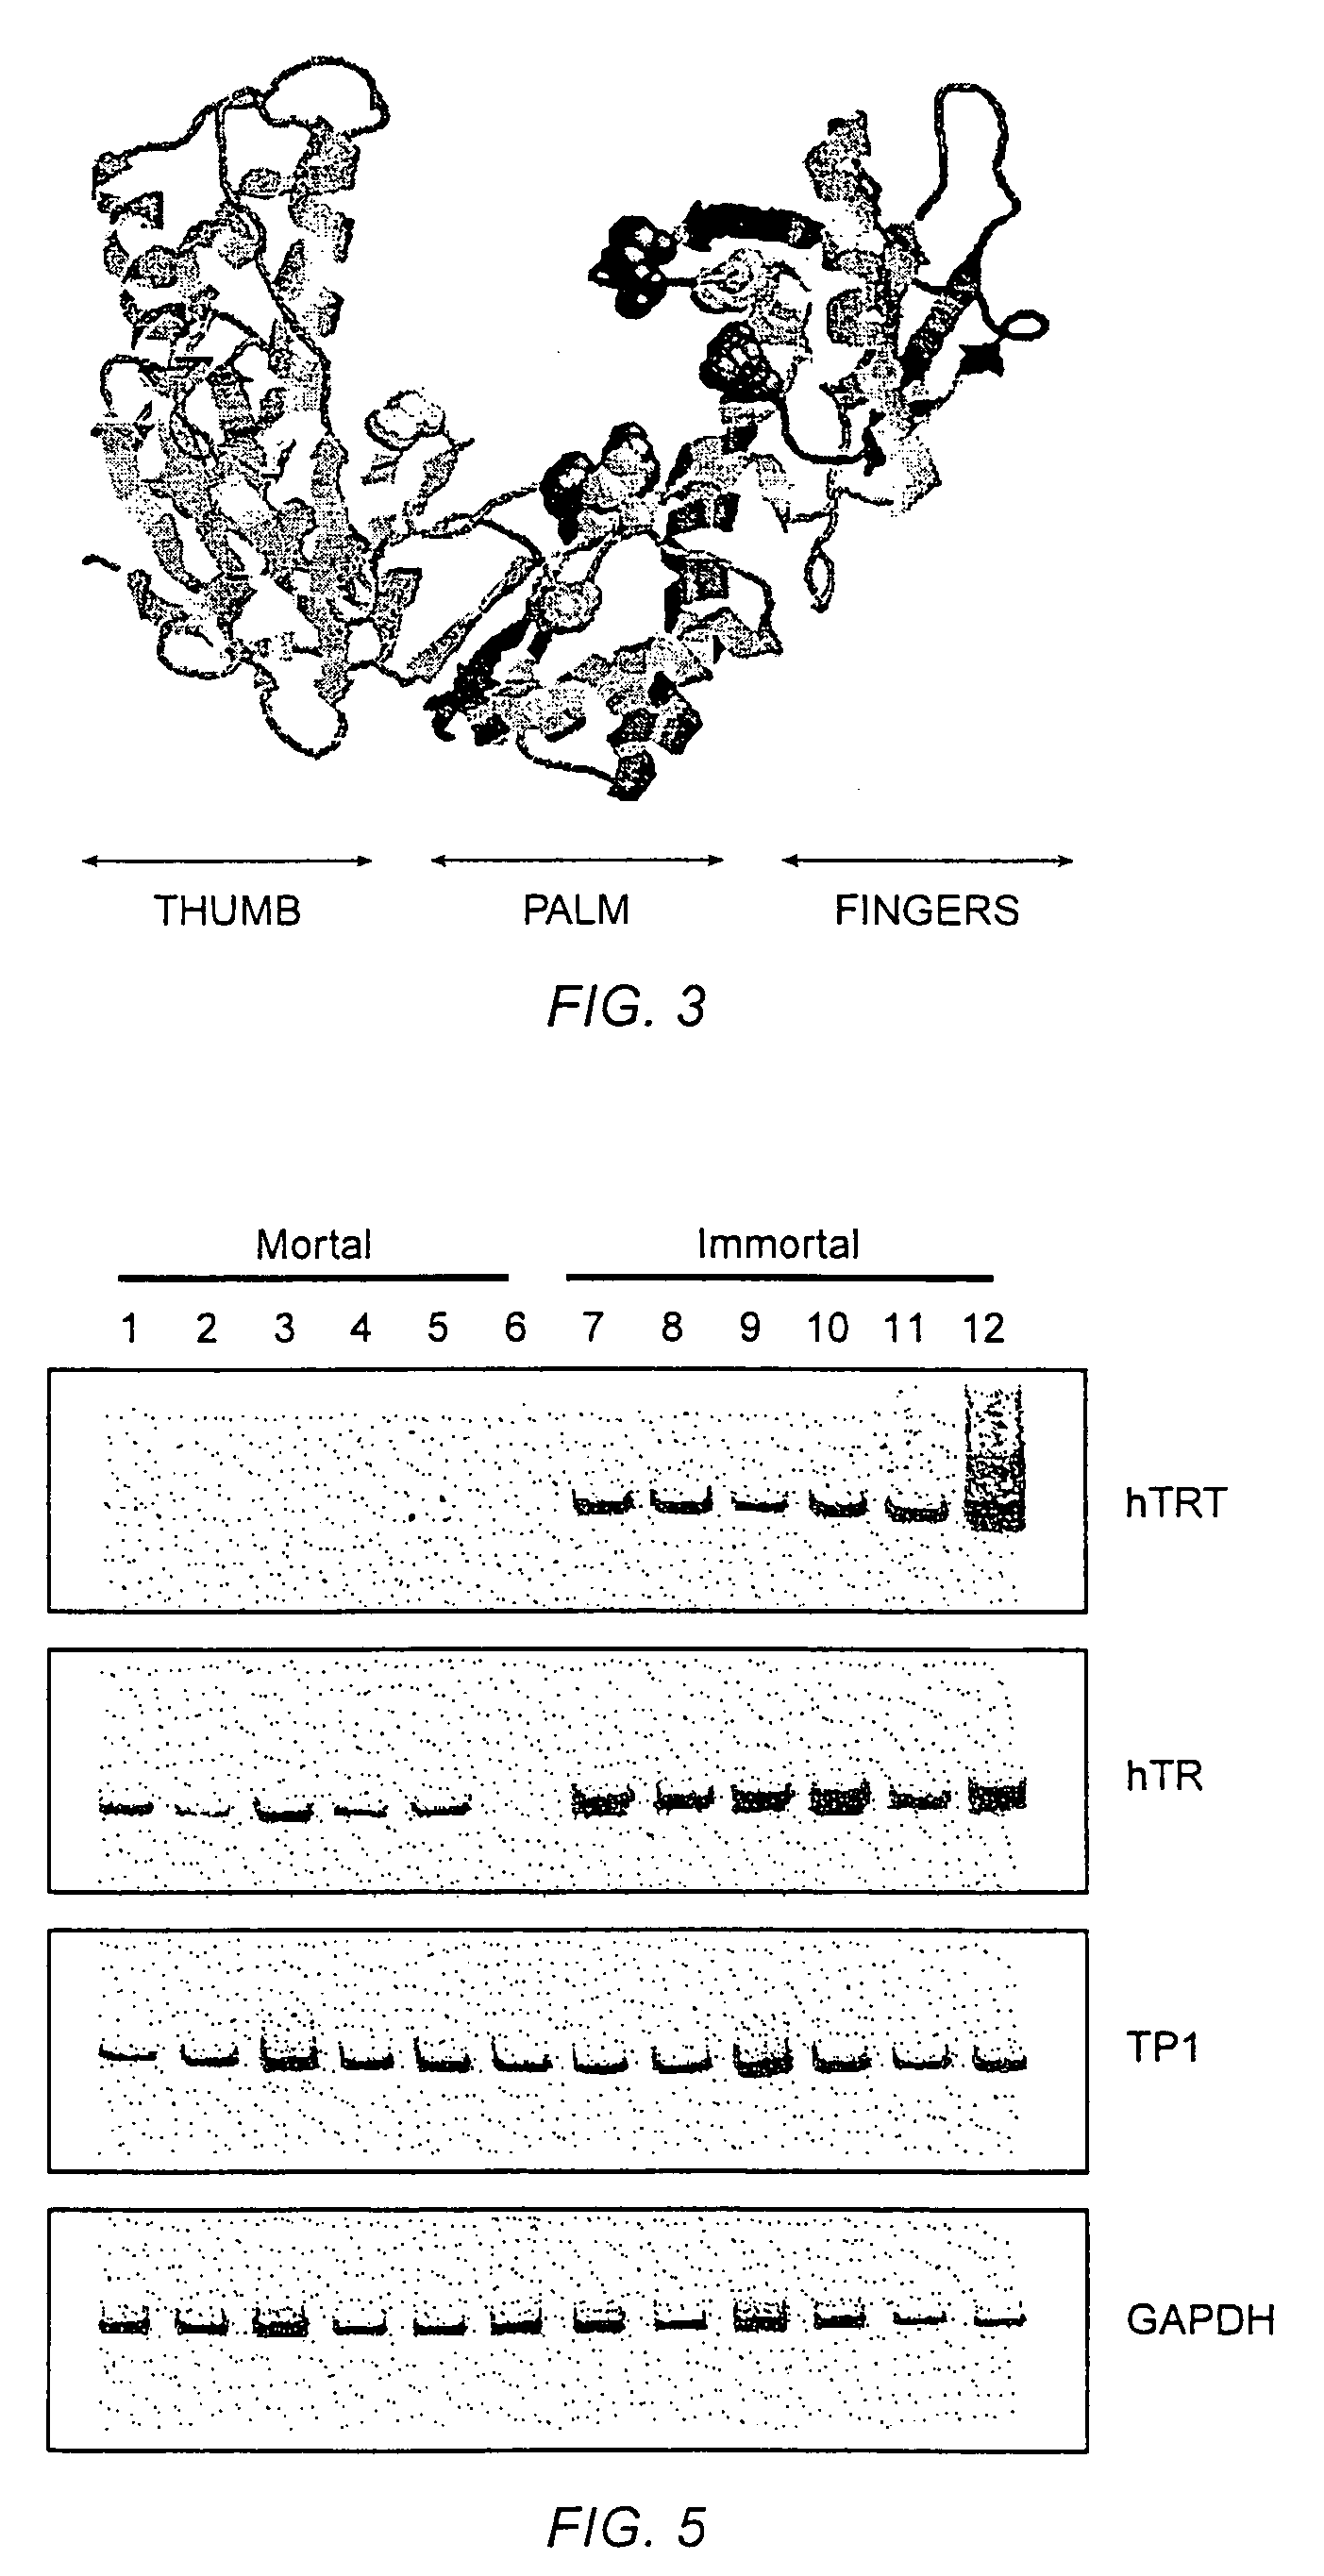 Nucleic acids encoding human telomerase reverse transcriptase and related homologs